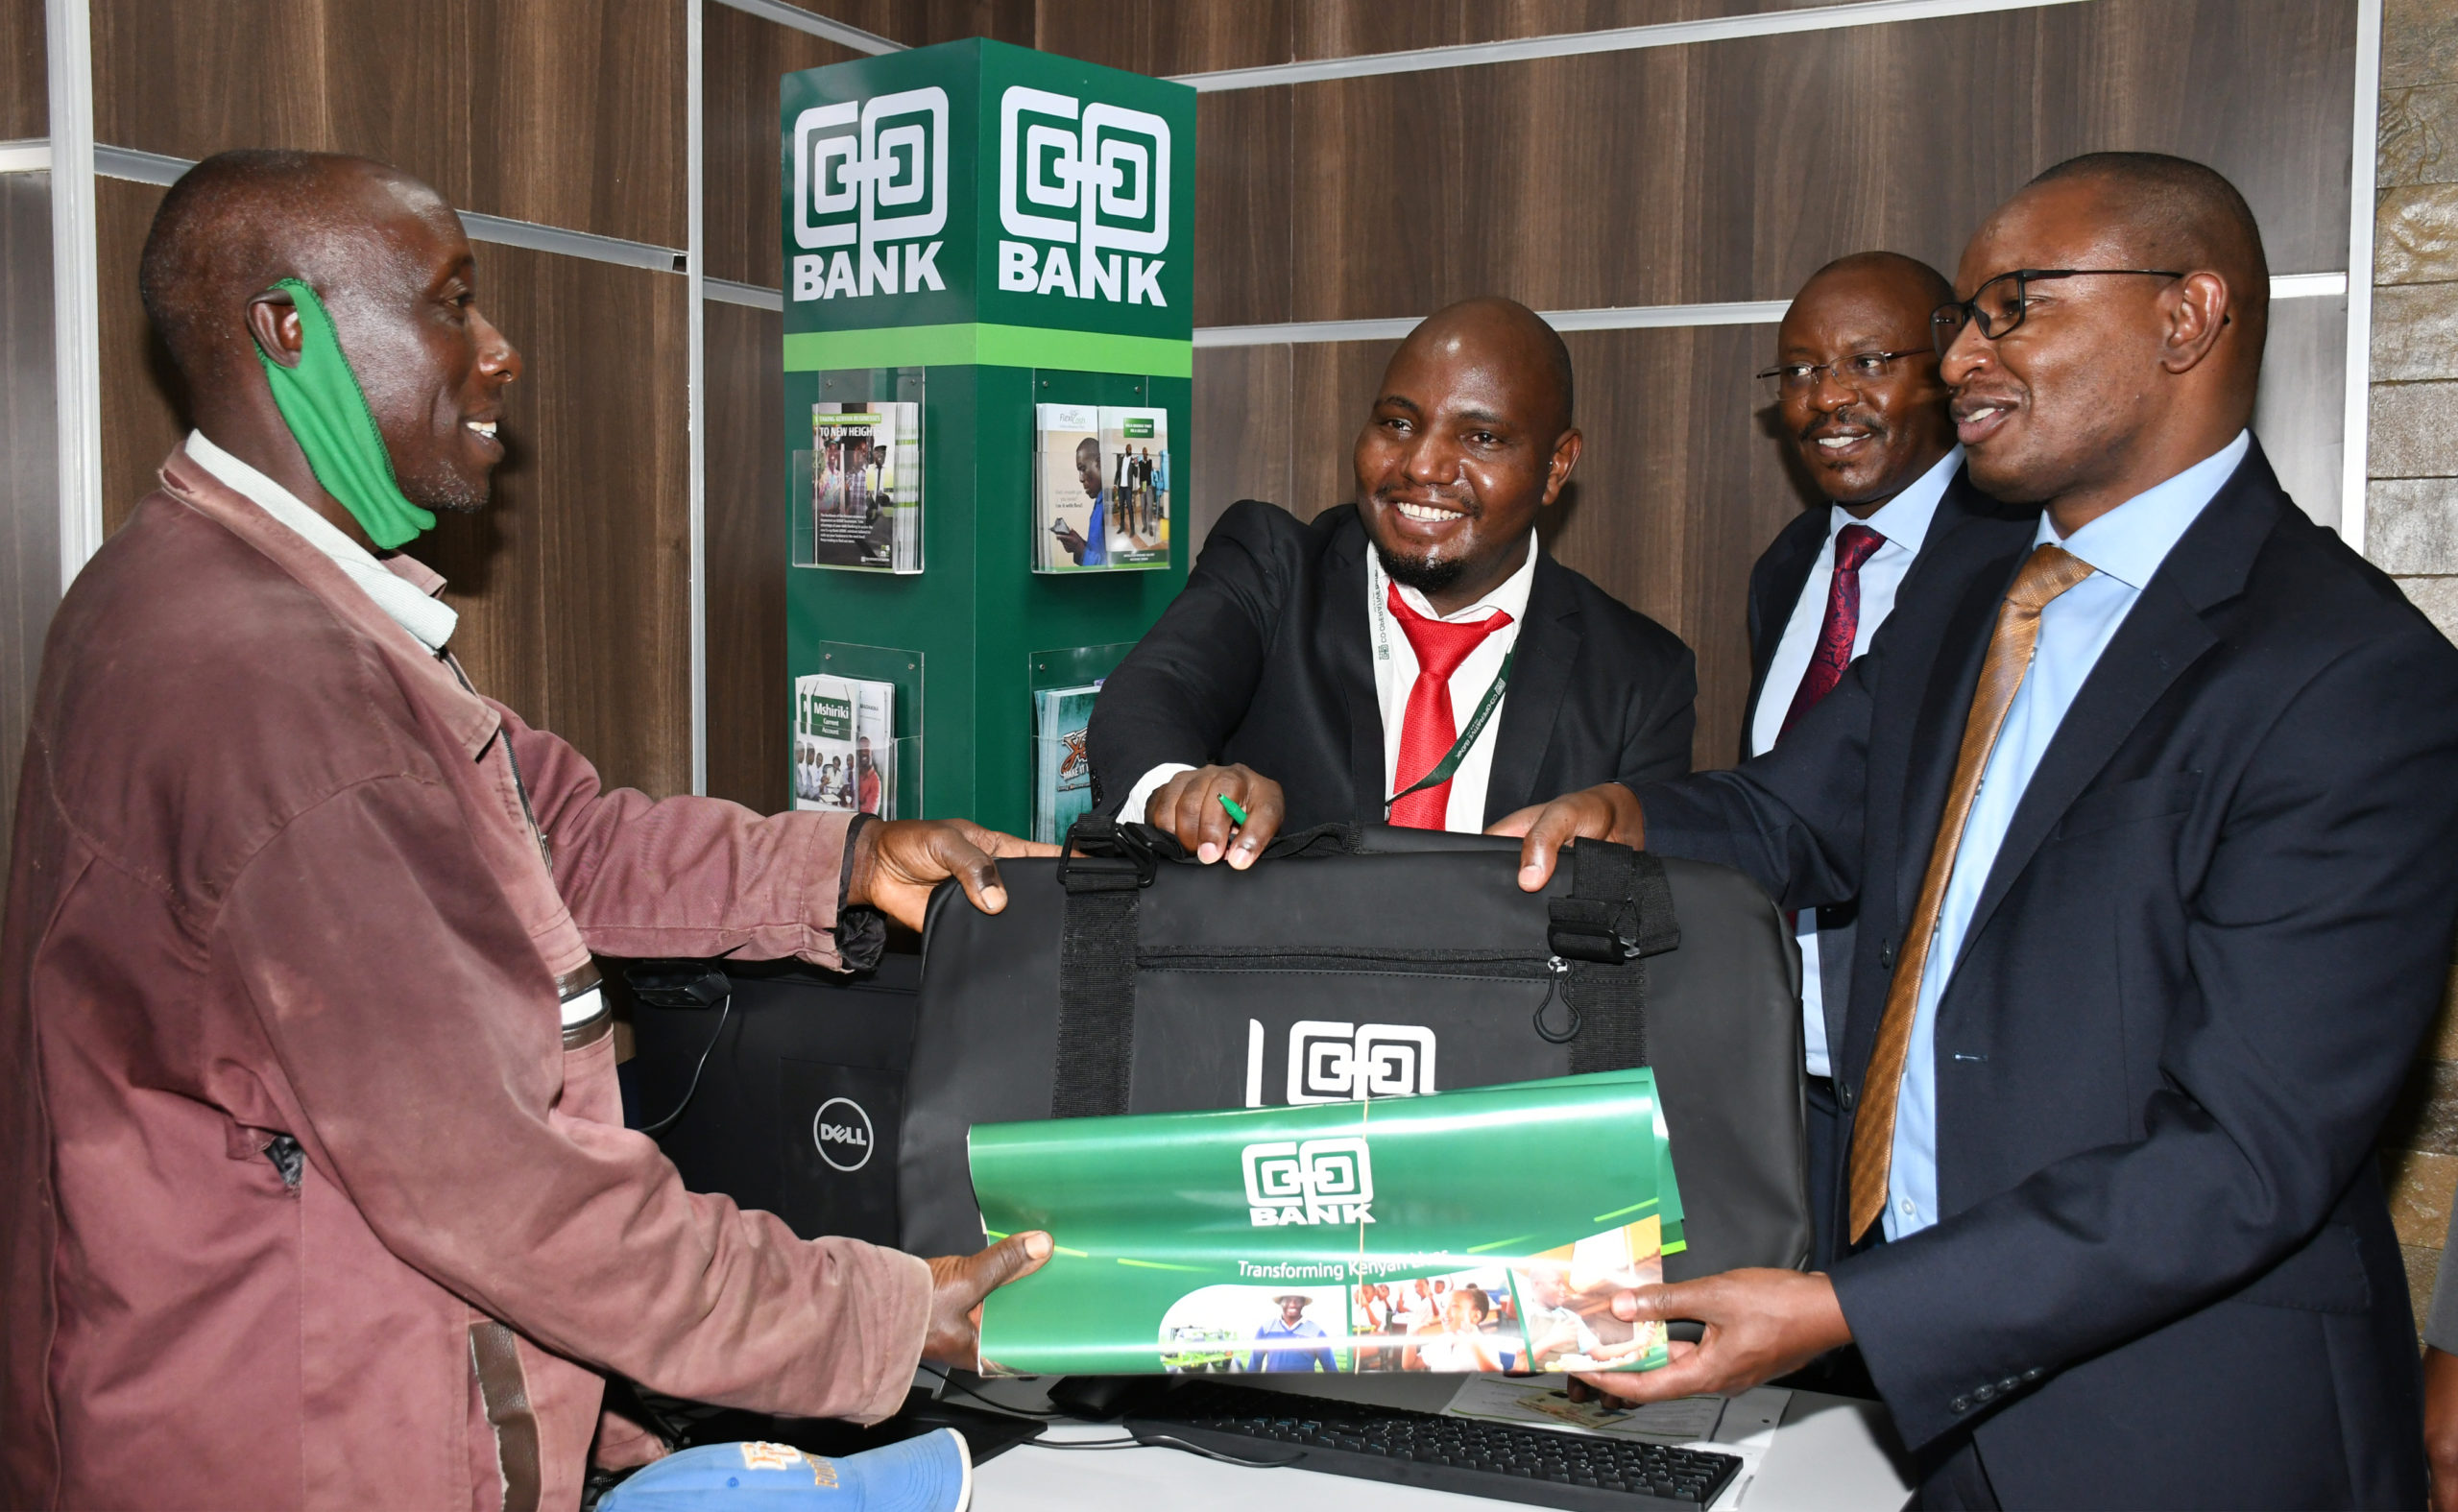 Director Retail & Business Banking William Ndumia presents a gift to Mr. who was the first client to open an account after the official opening of Co-op Kamulu branch Mr Joseph Kimathi Ndegwa . Looking on is the bank's Head of Branch Banking Peter Kirugu.